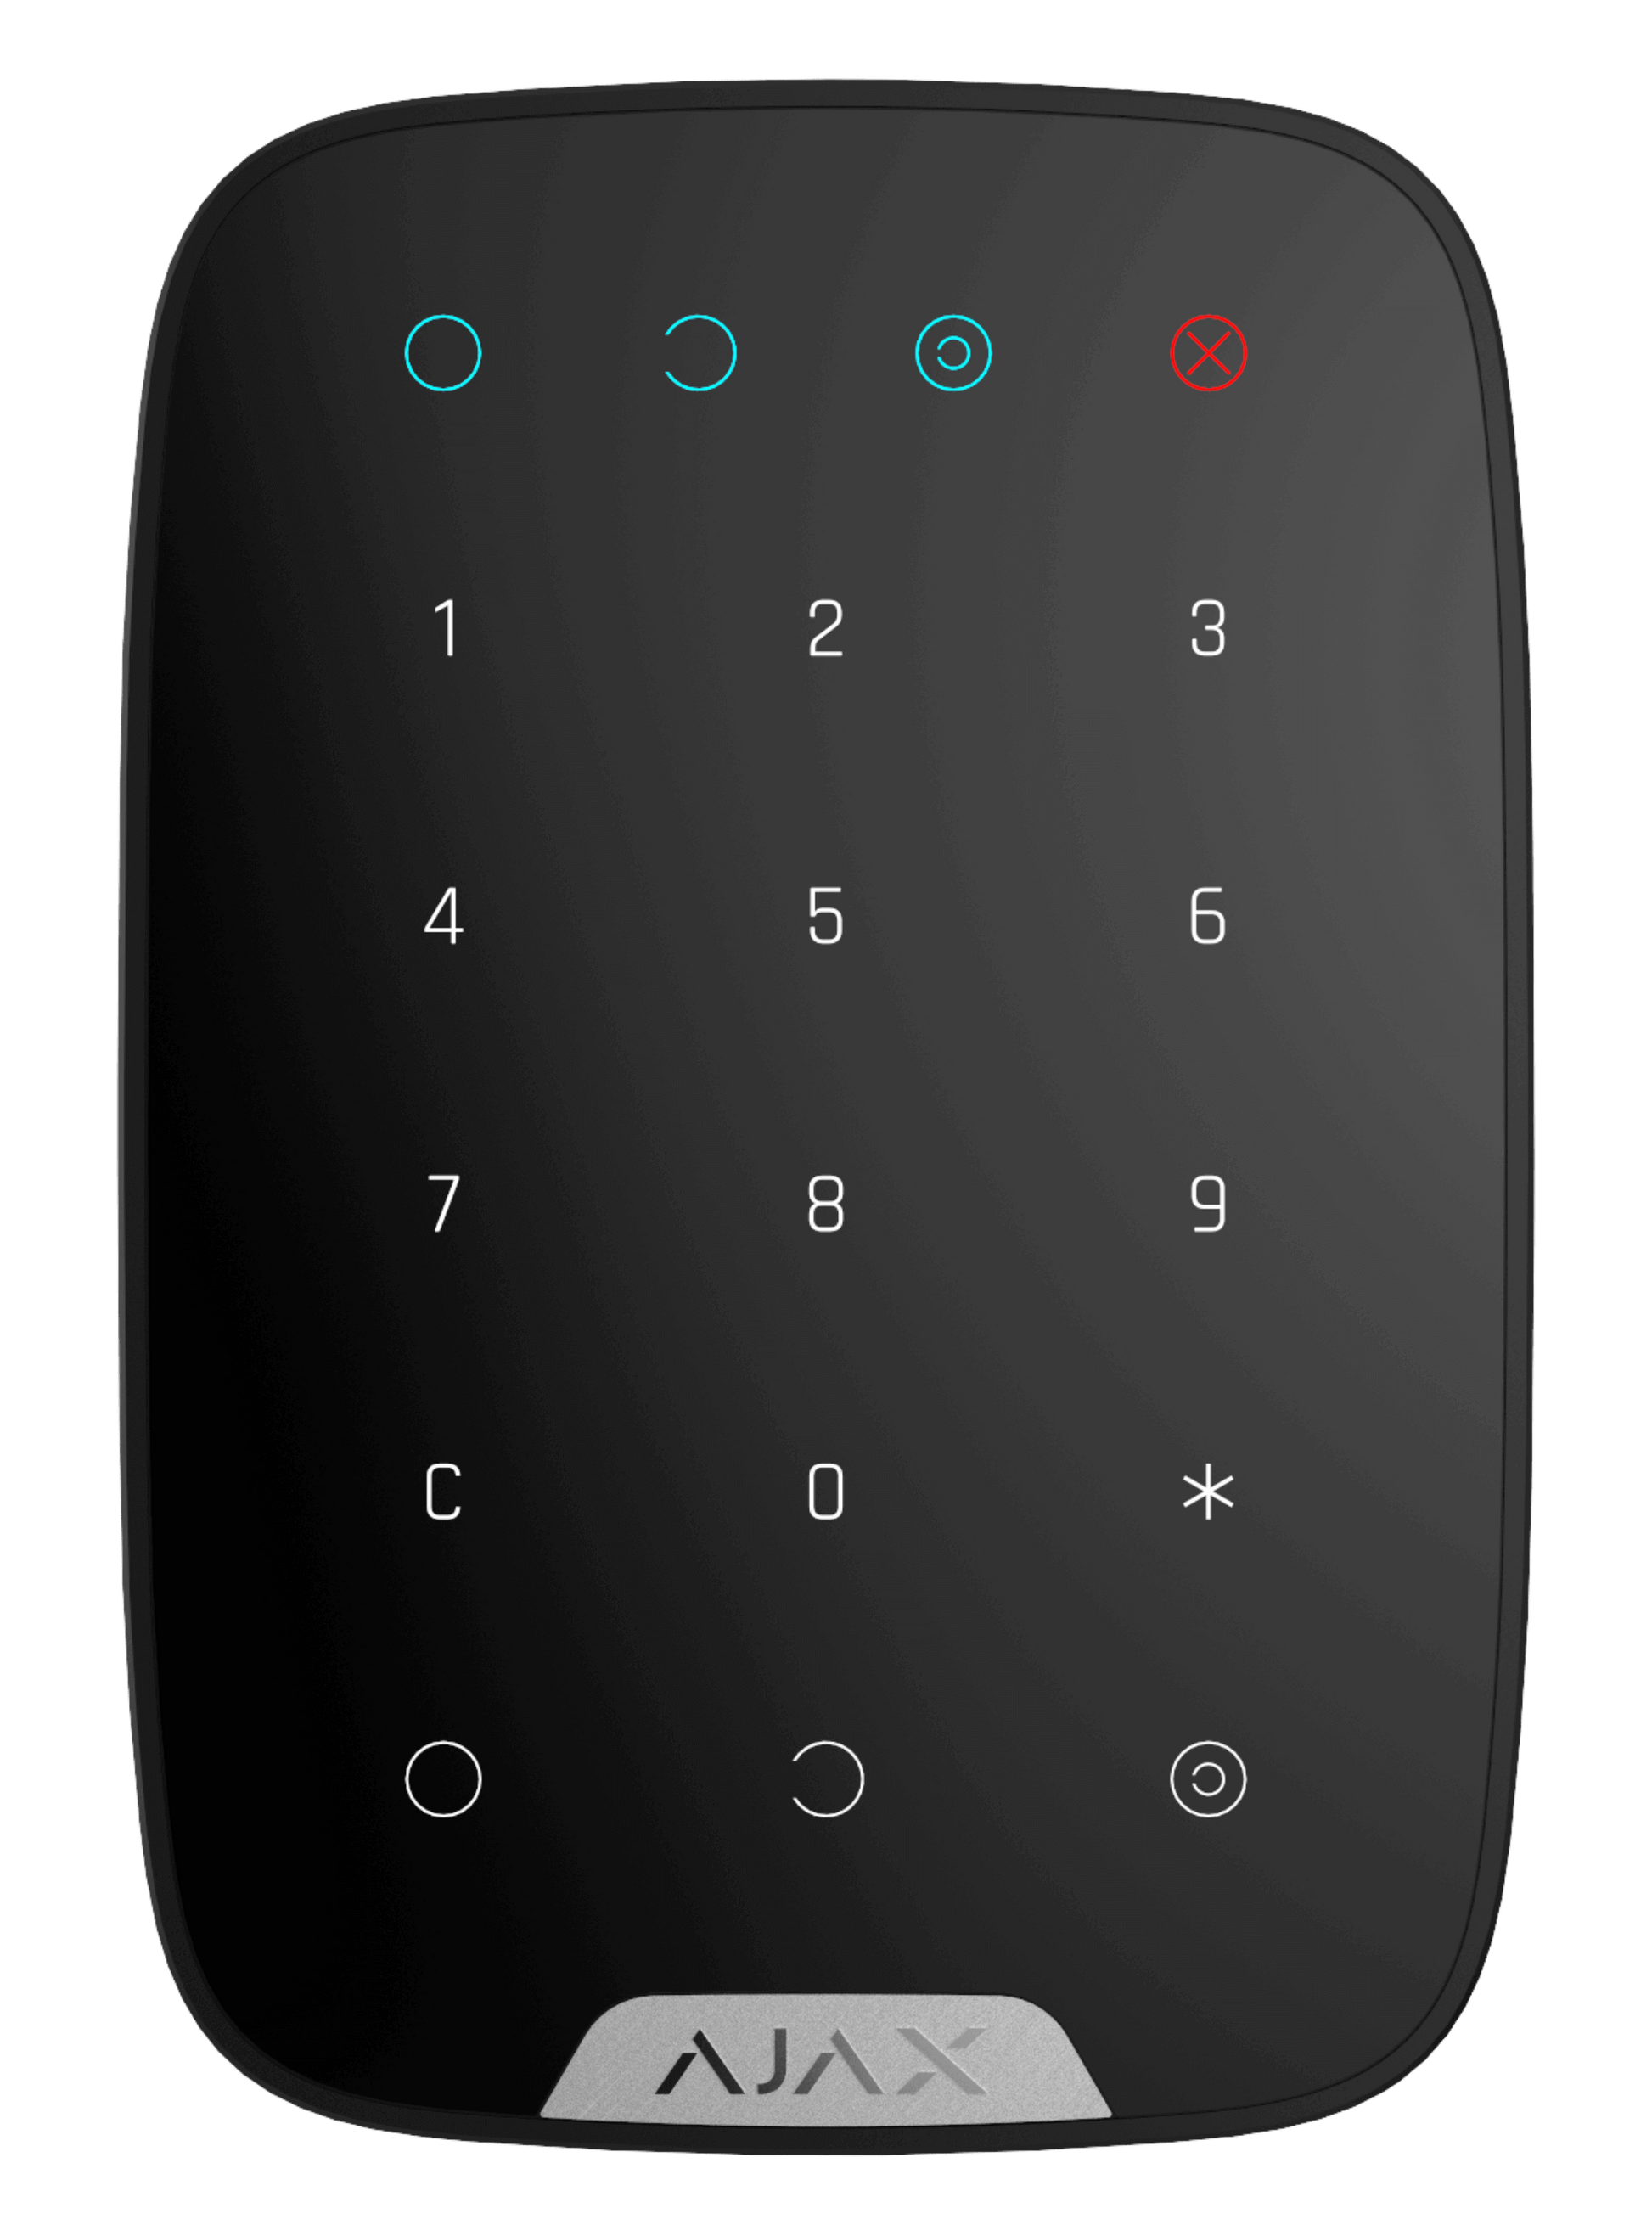 Black Ajax KeyPad a practical numerical keypad for alarm system control,  150 × 103 × 14 mm in size , 197grams in weight for smart home and business security, front view